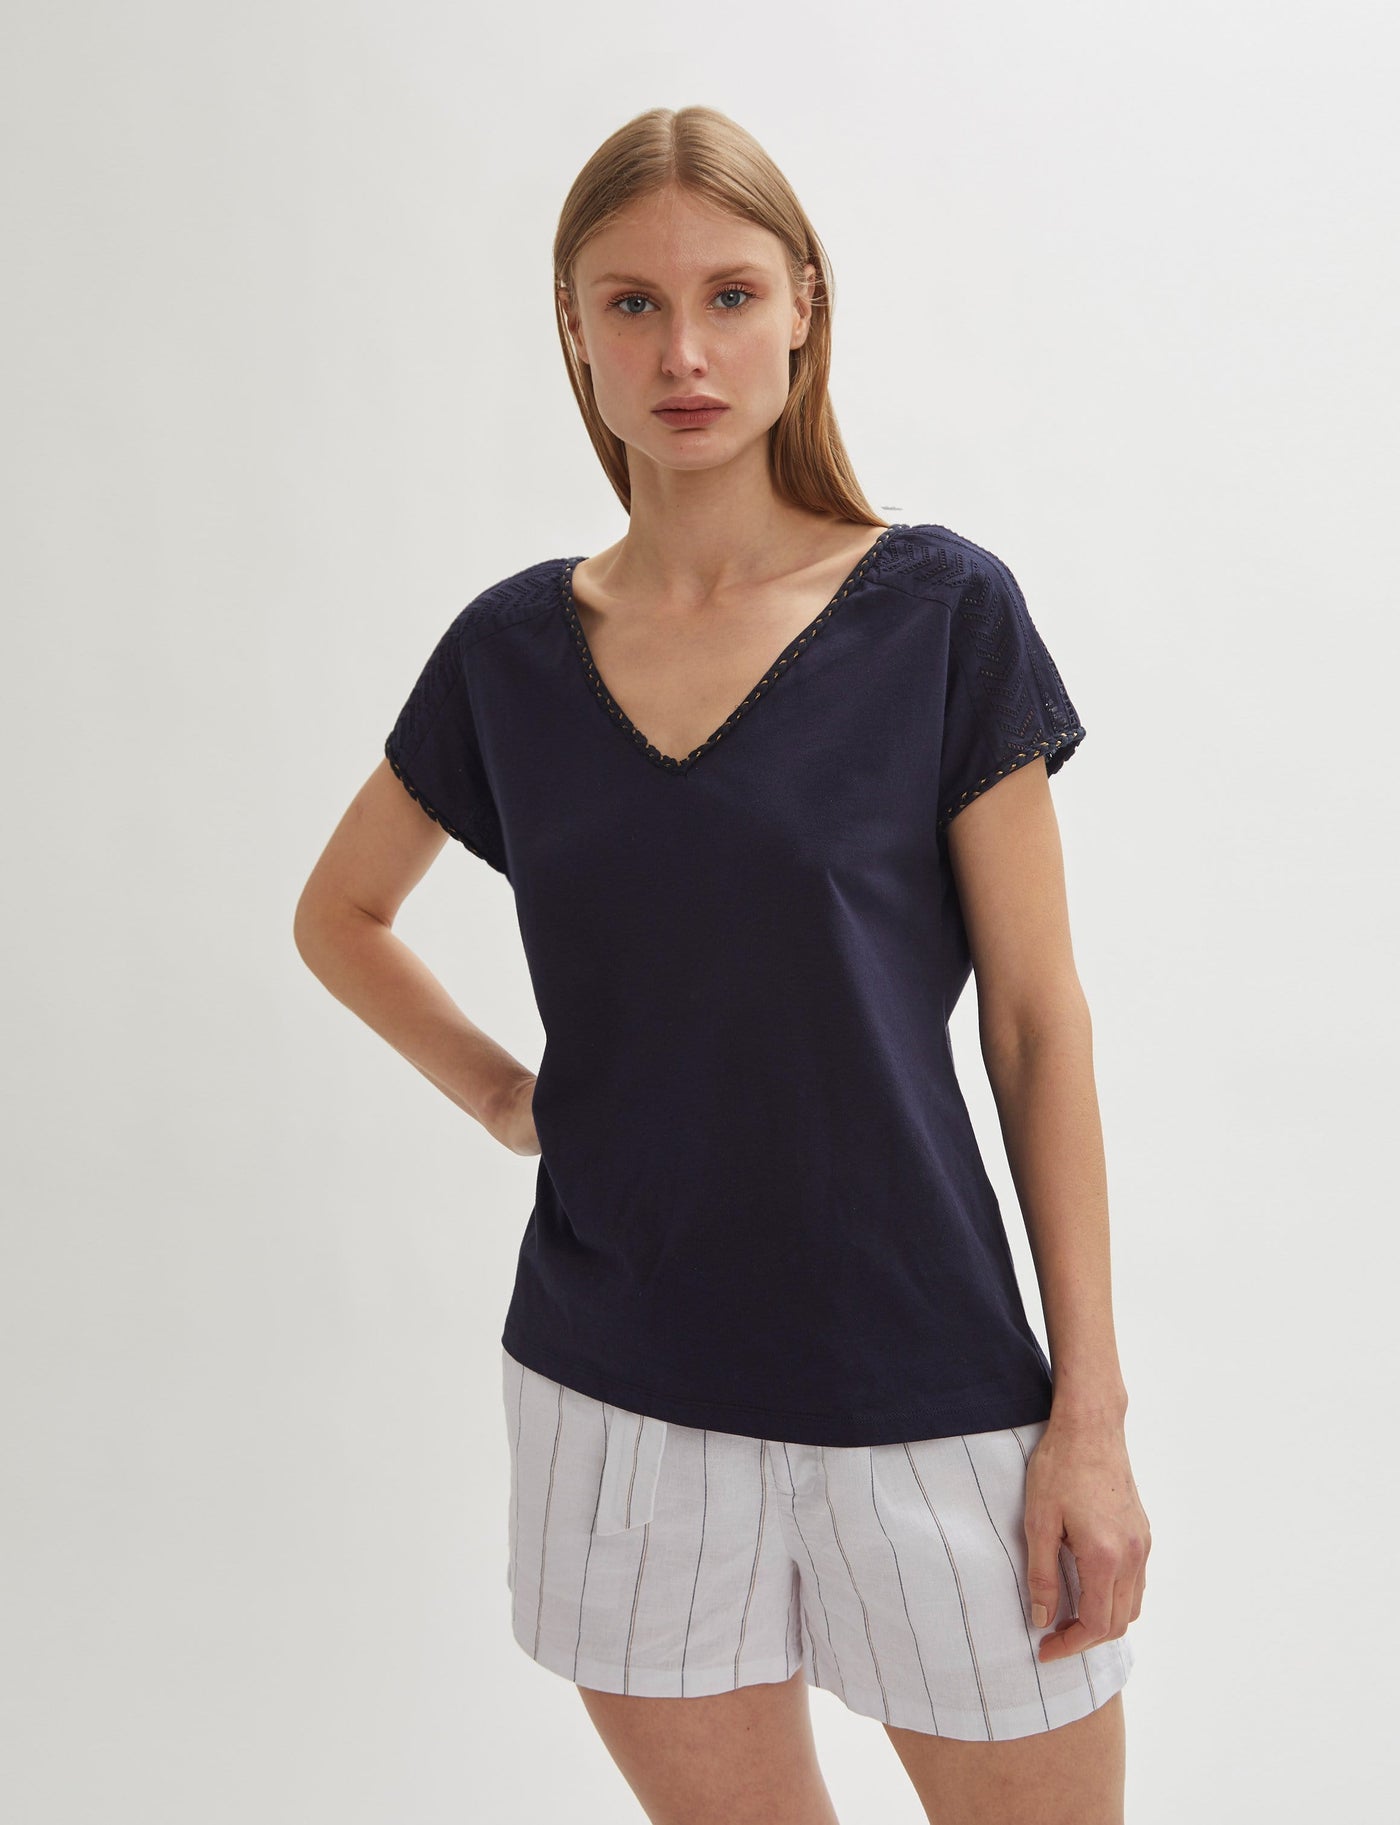 Broderie Anglaise Trim Top